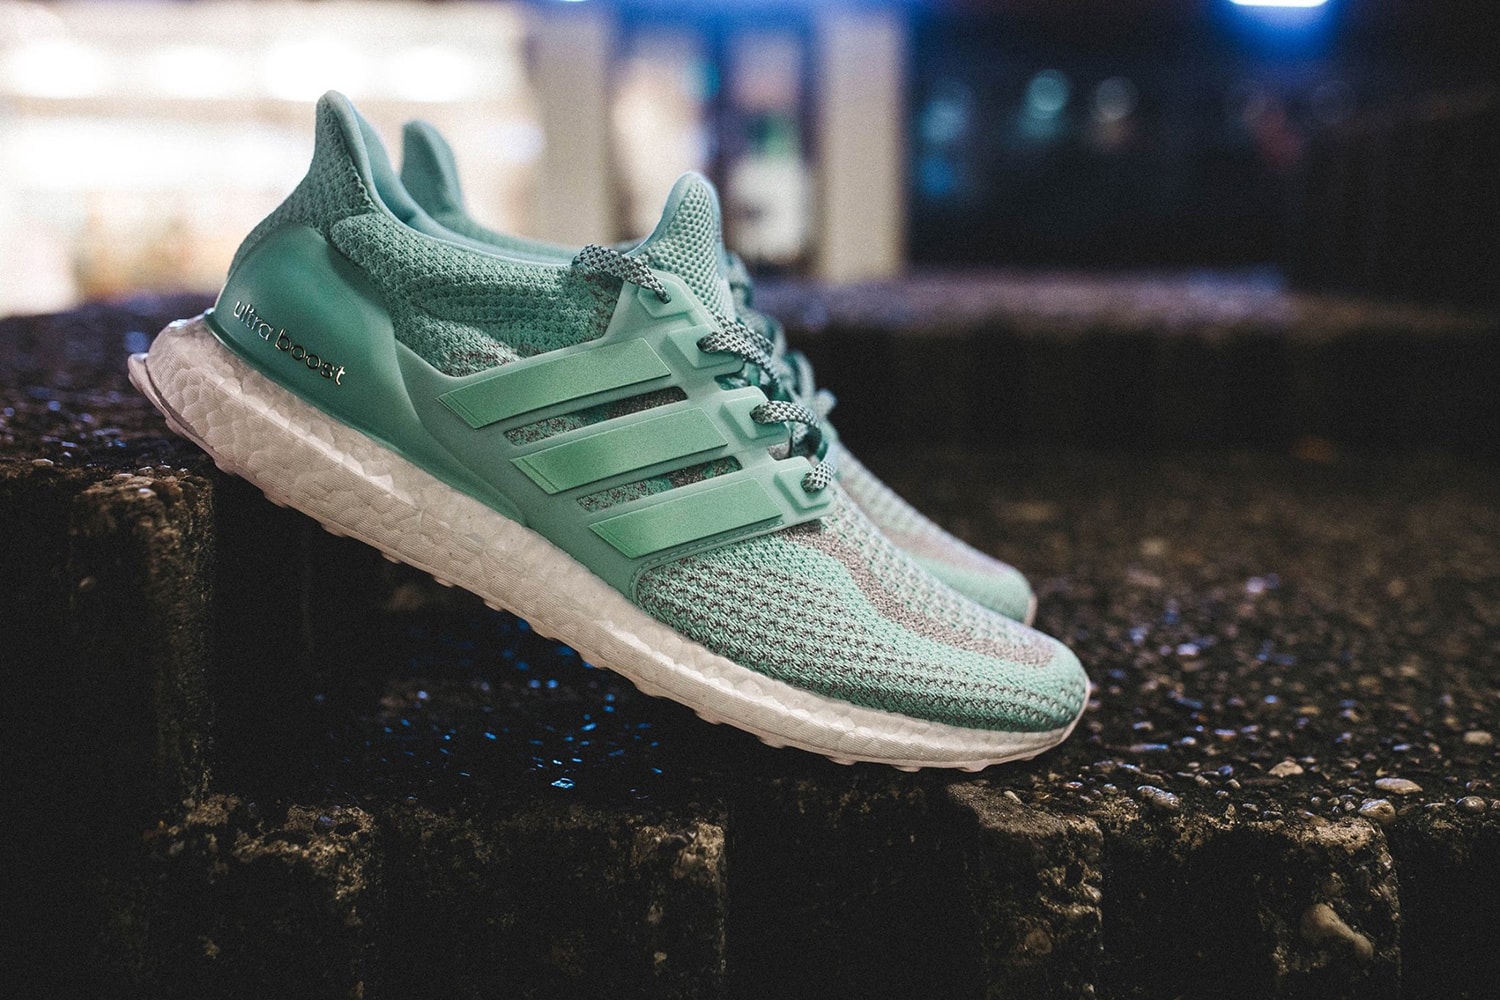 adidas' miUltraBOOST NYC-Exclusive "Stature of Liberty" Edition Three Stripes BOOST Technology New York City Flagship Store